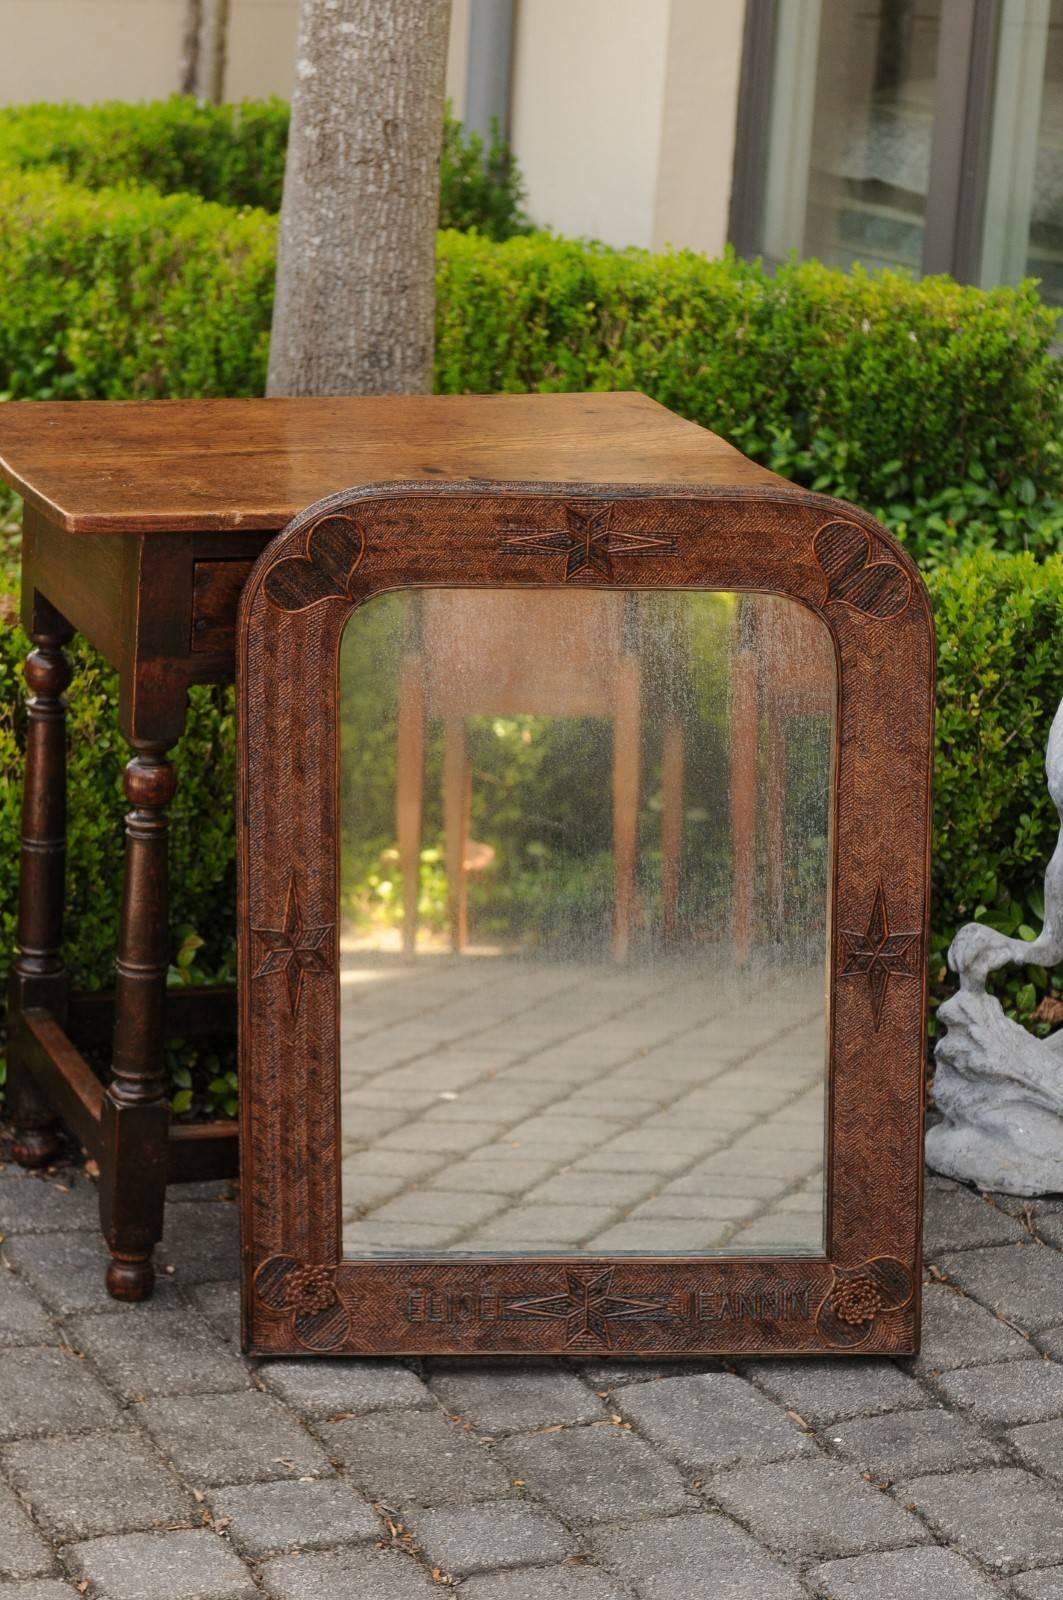 A French Folk Art mirror from the early 20th century, with heart and star motifs. This French Folk Art mirror features an elegant Louis-Philippe inspired Silhouette, recognizable by its linear frame topped with rounded corners. While Louis-Philippe